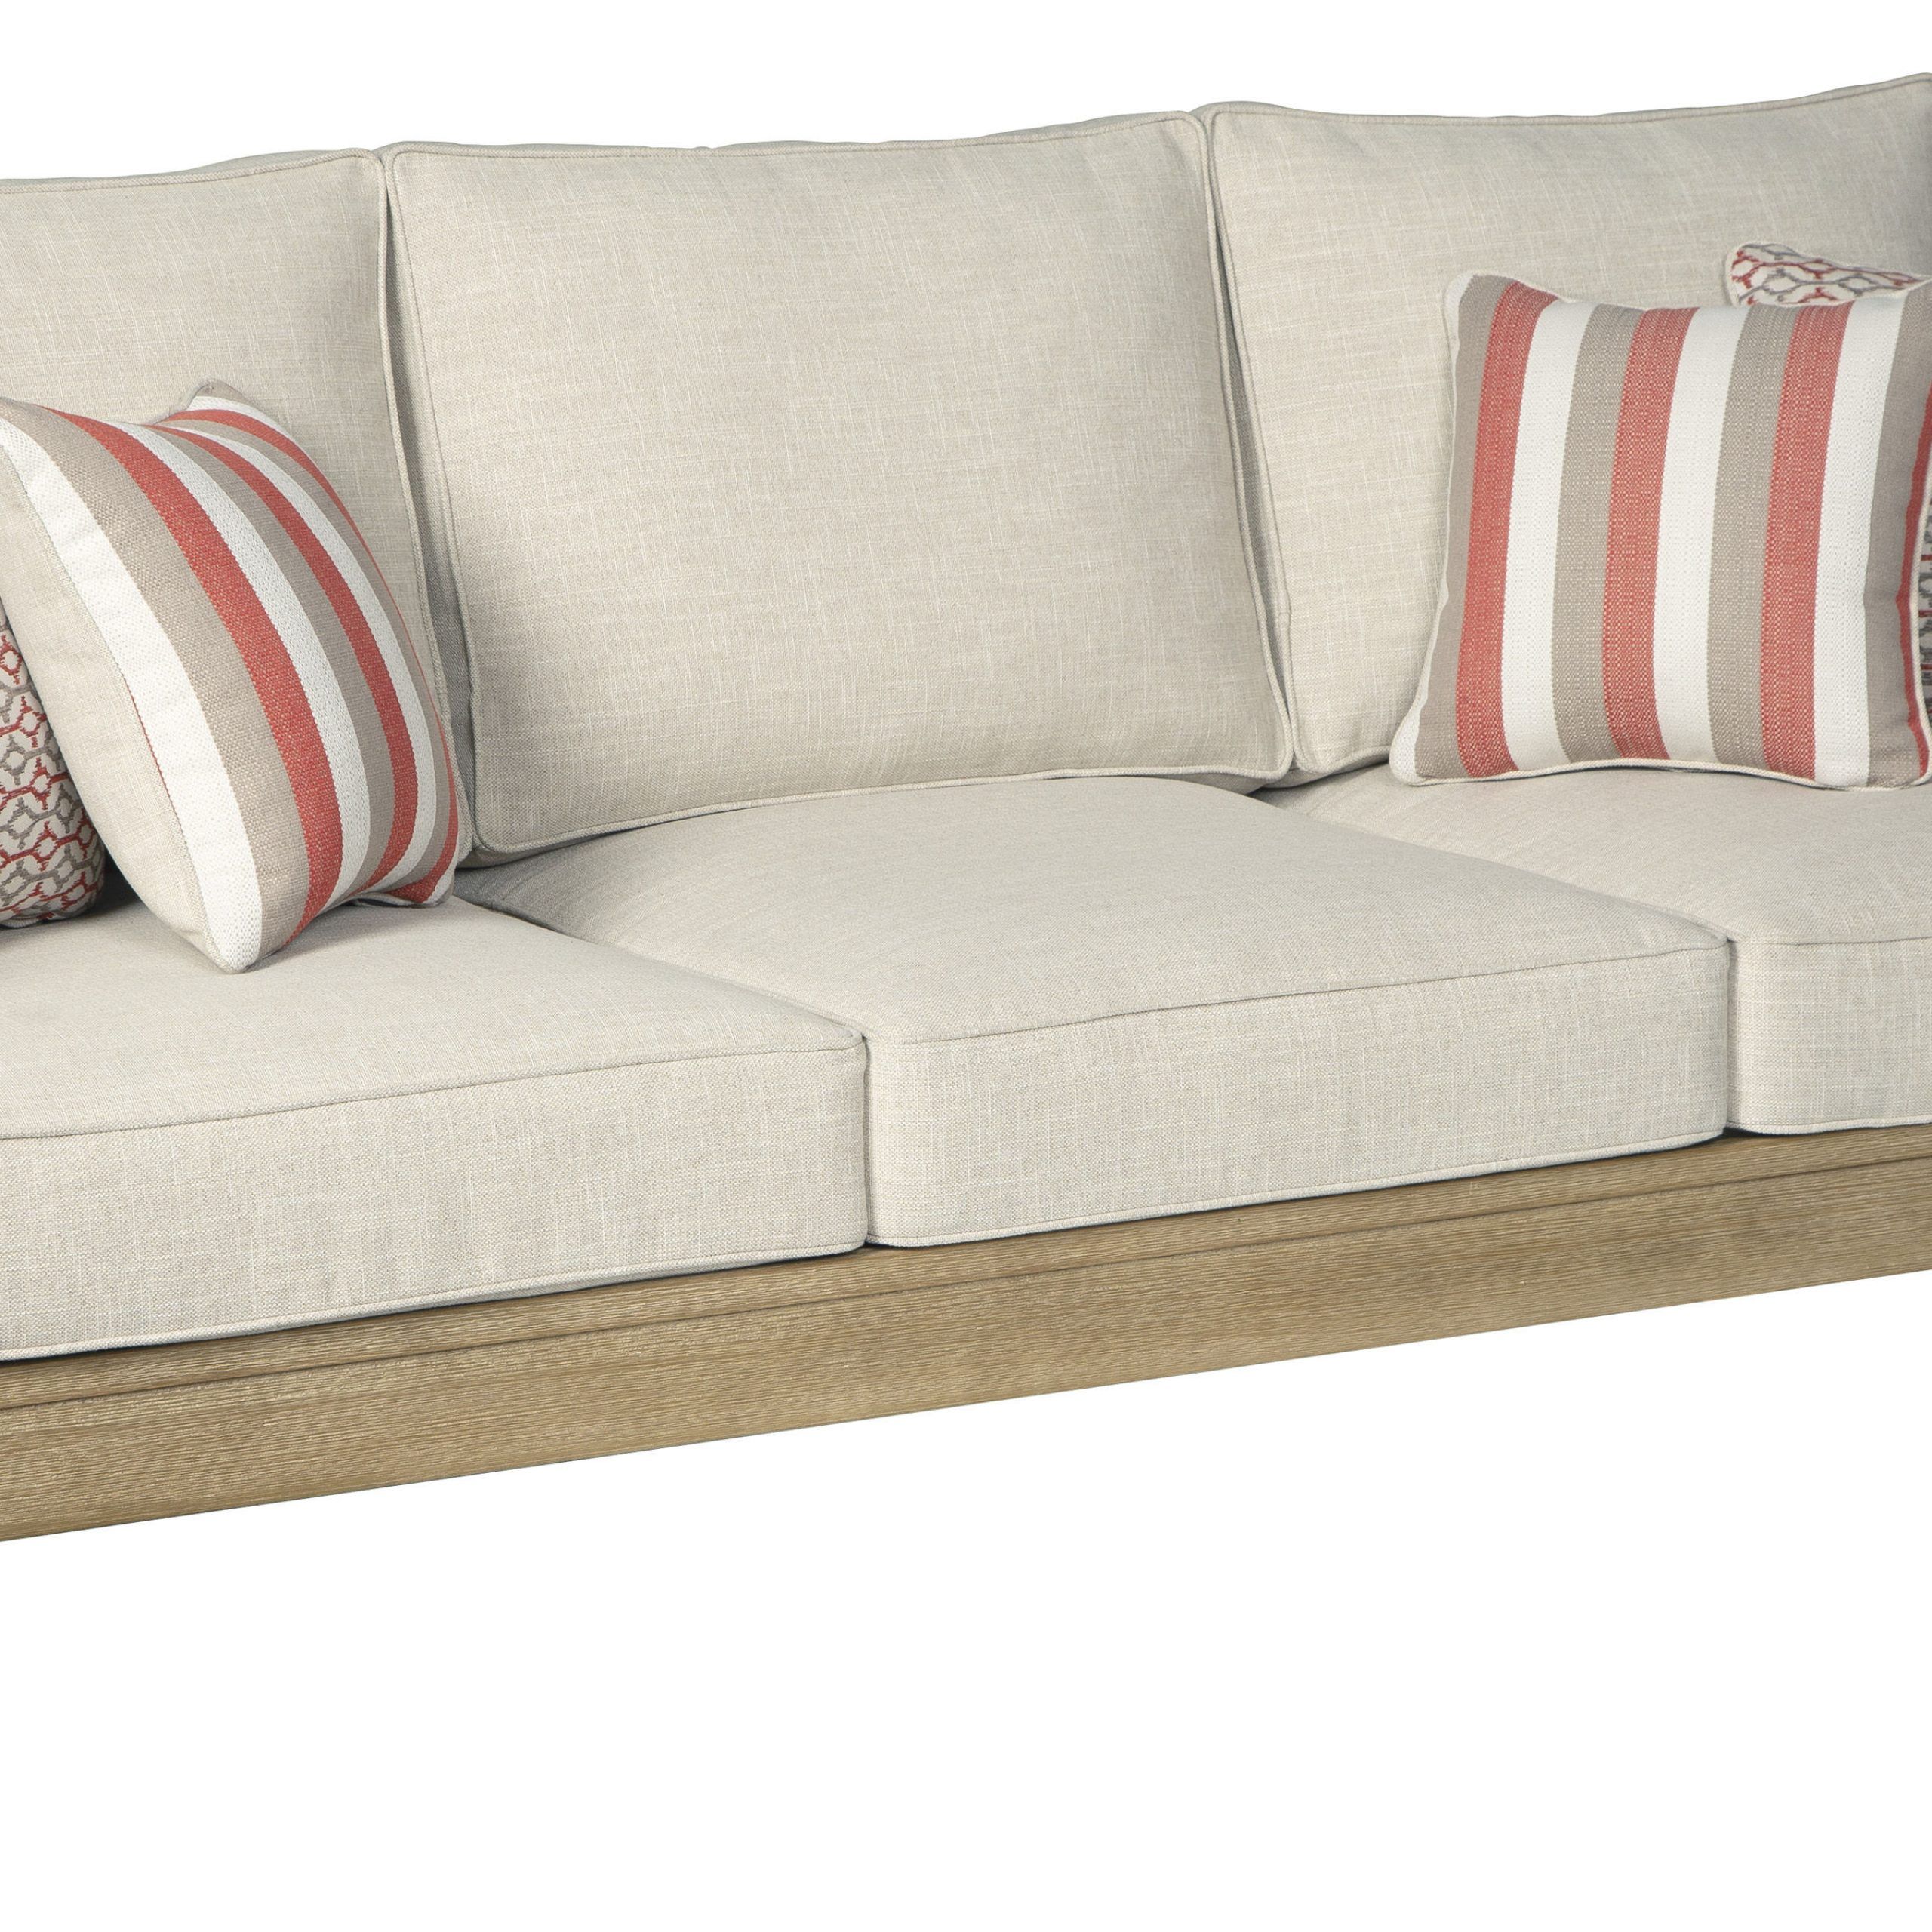 Ashley Furniture Clare View Beige Wood Sofa | The Classy Home With Regard To Ecru And Otter Console Tables (Photo 3 of 20)